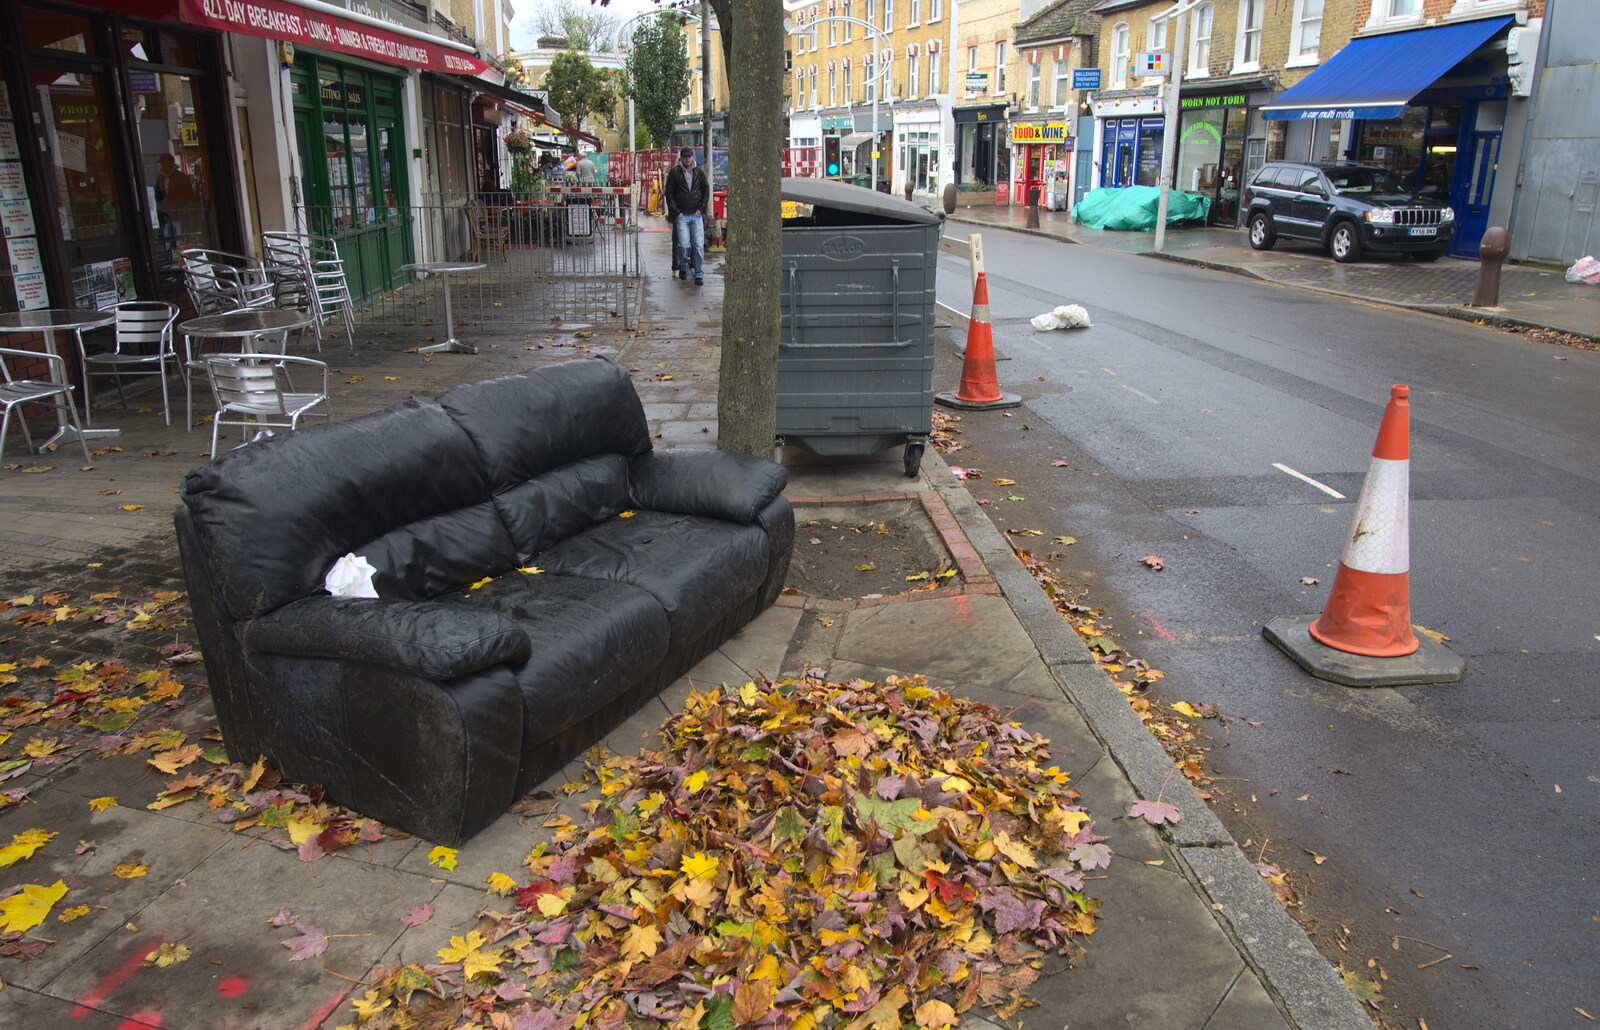 A sofa on the pavement, Bellenden Road from Another Trip to Peckham, Southwark, London - 28th October 2012